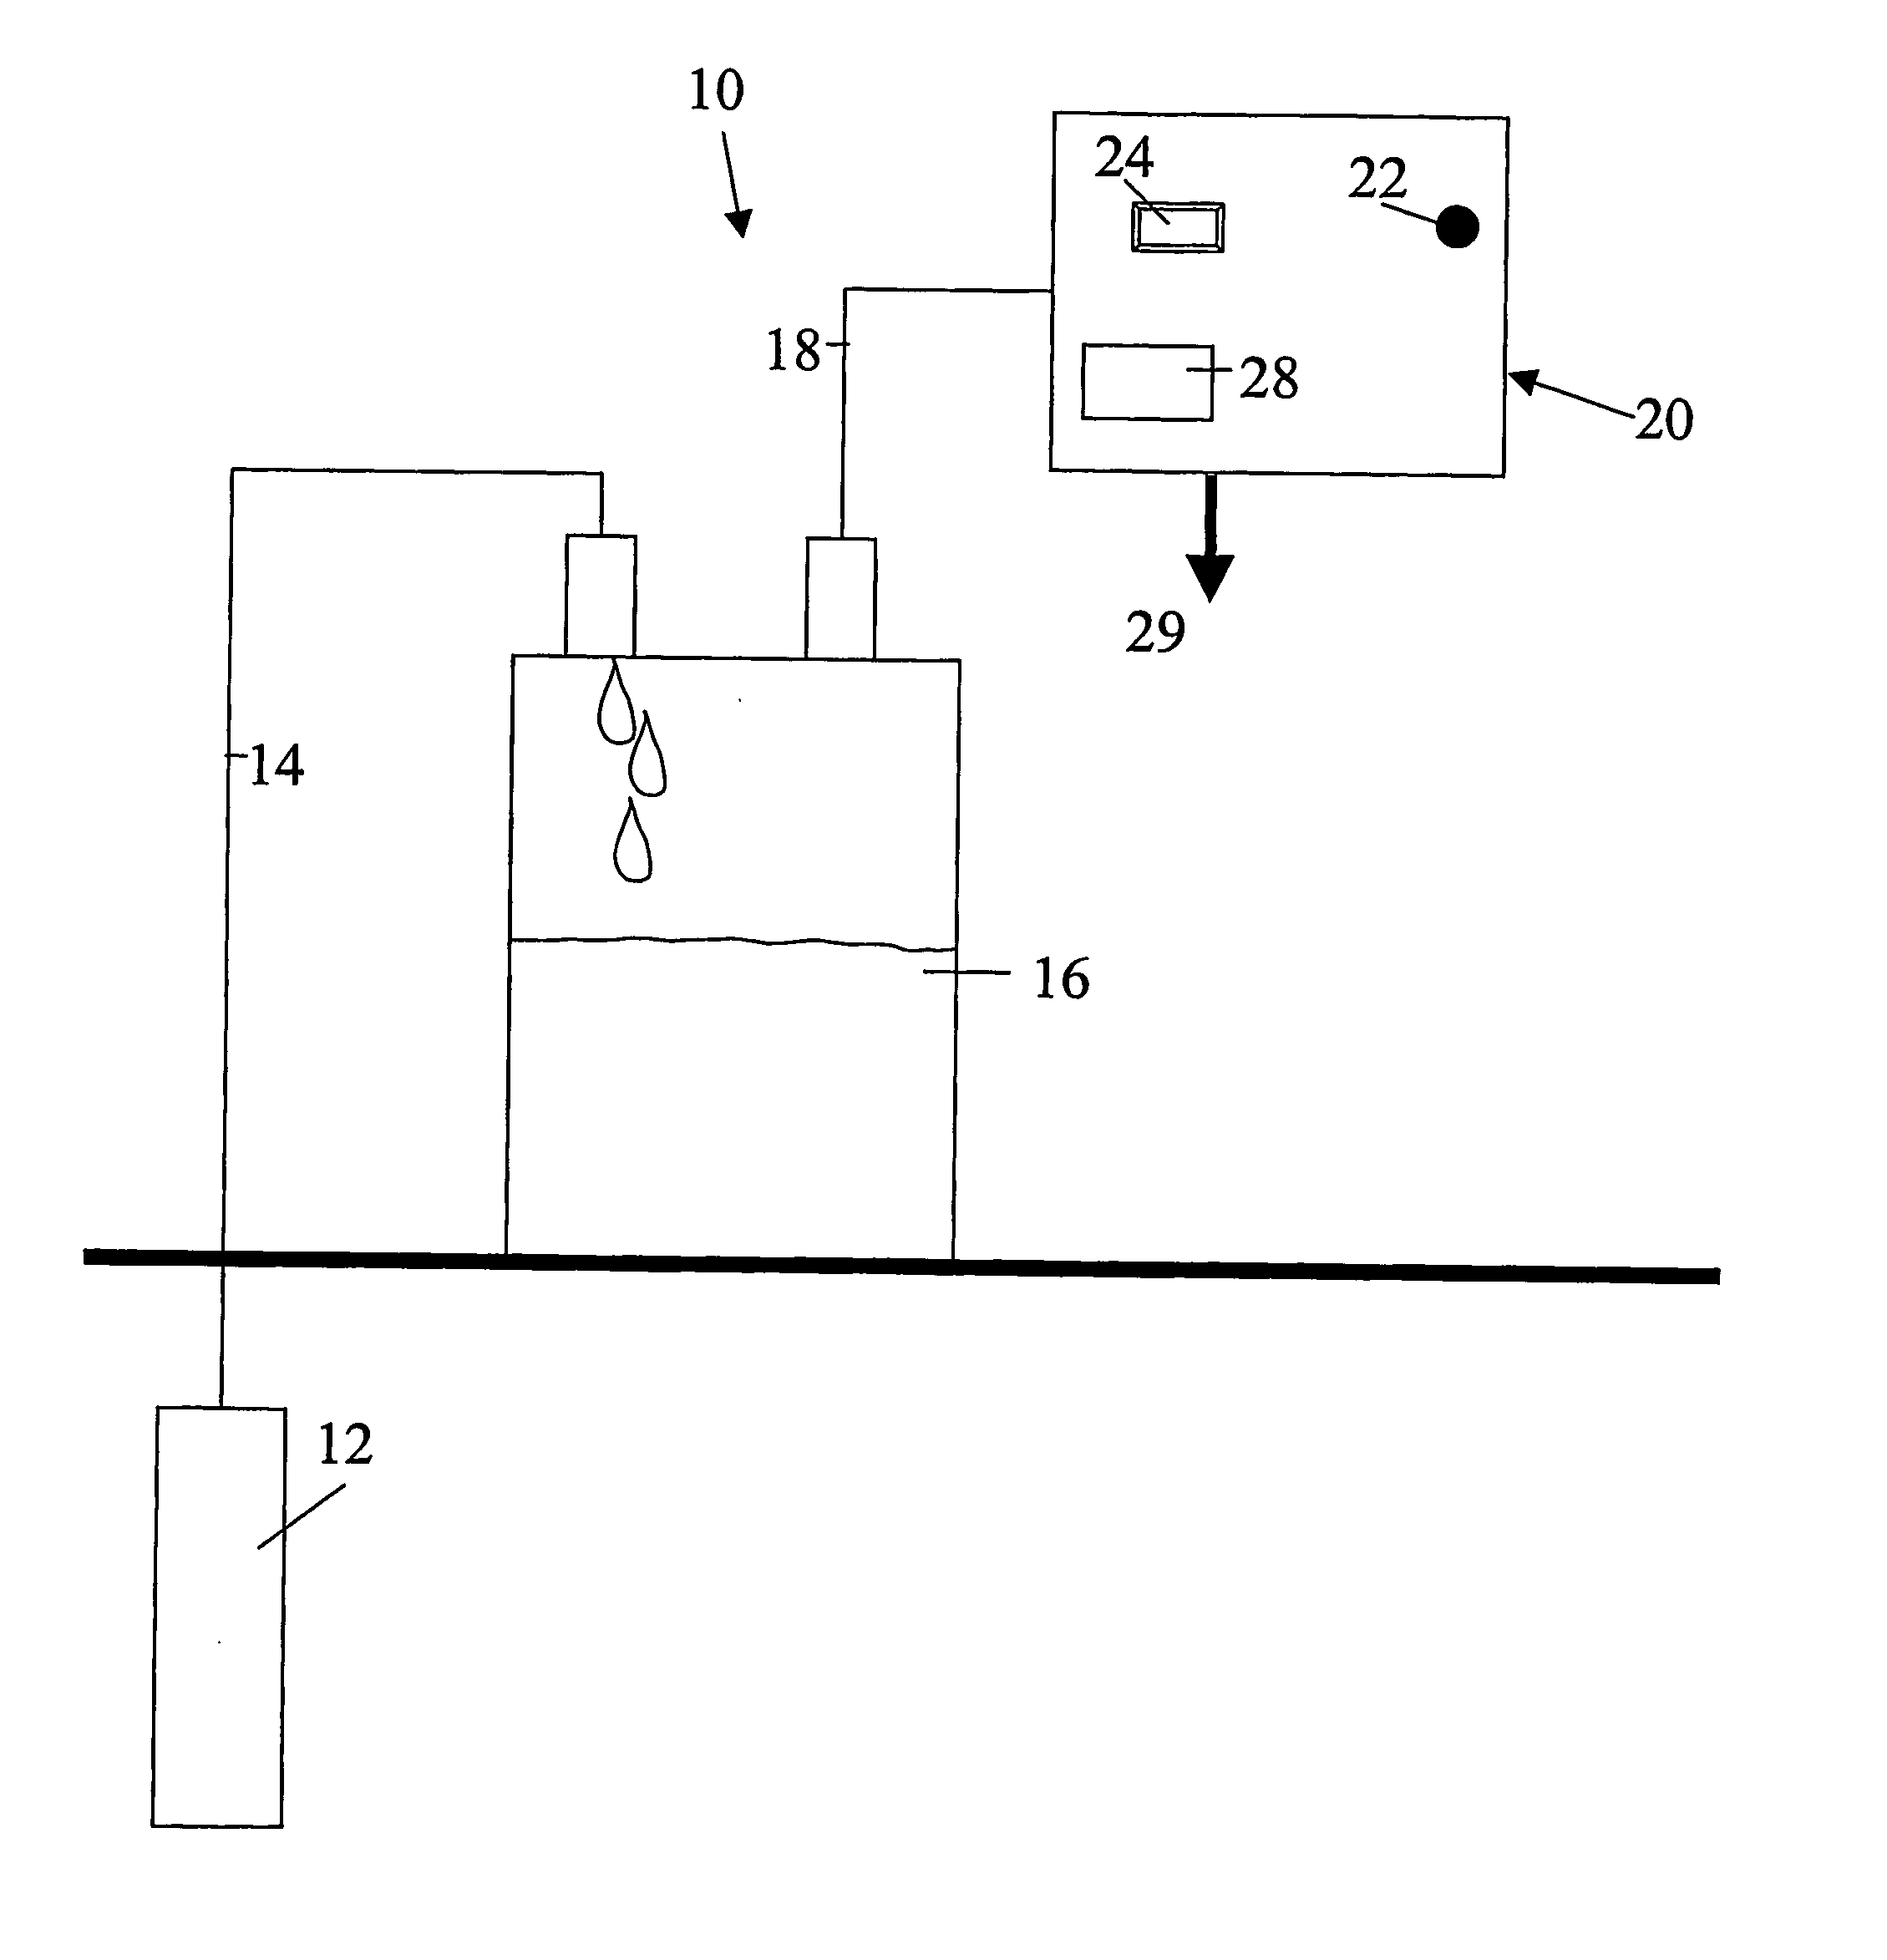 Apparatus and method for collecting soil solution samples